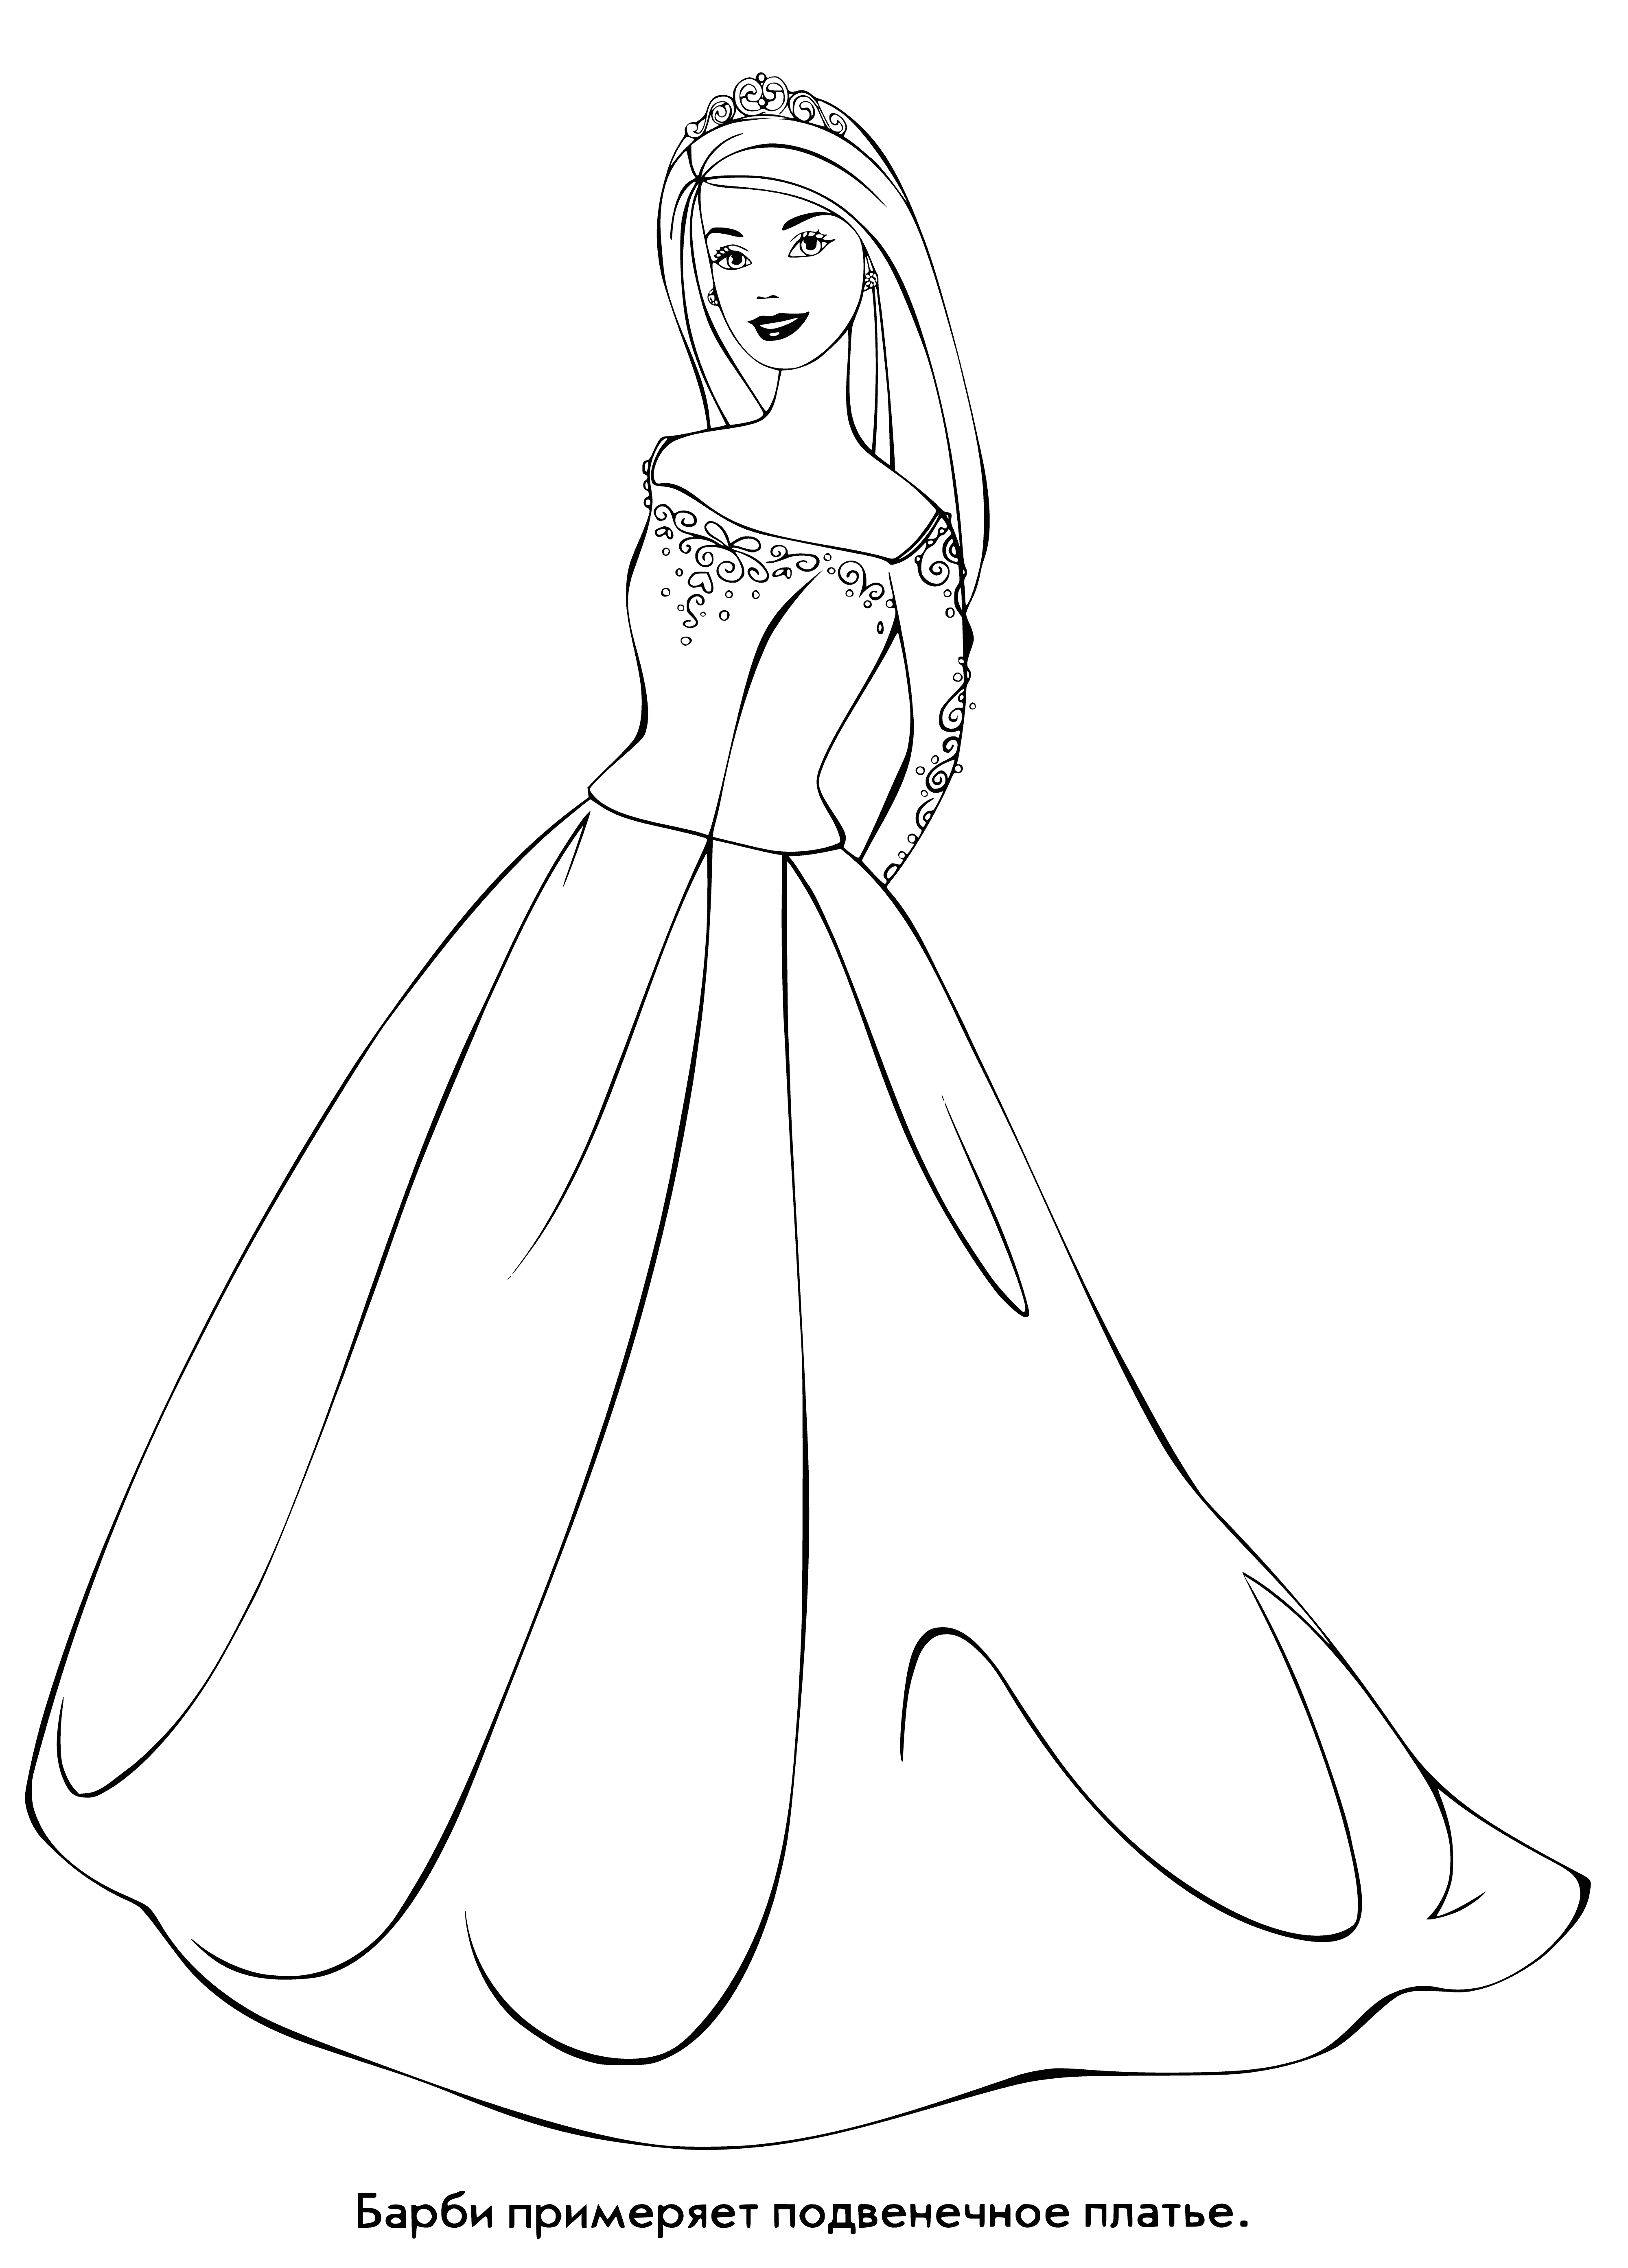 coloring page: Barbie admires herself in a wedding dress, updo & veil, clutching a bouquet of flowers in front of a mirror.